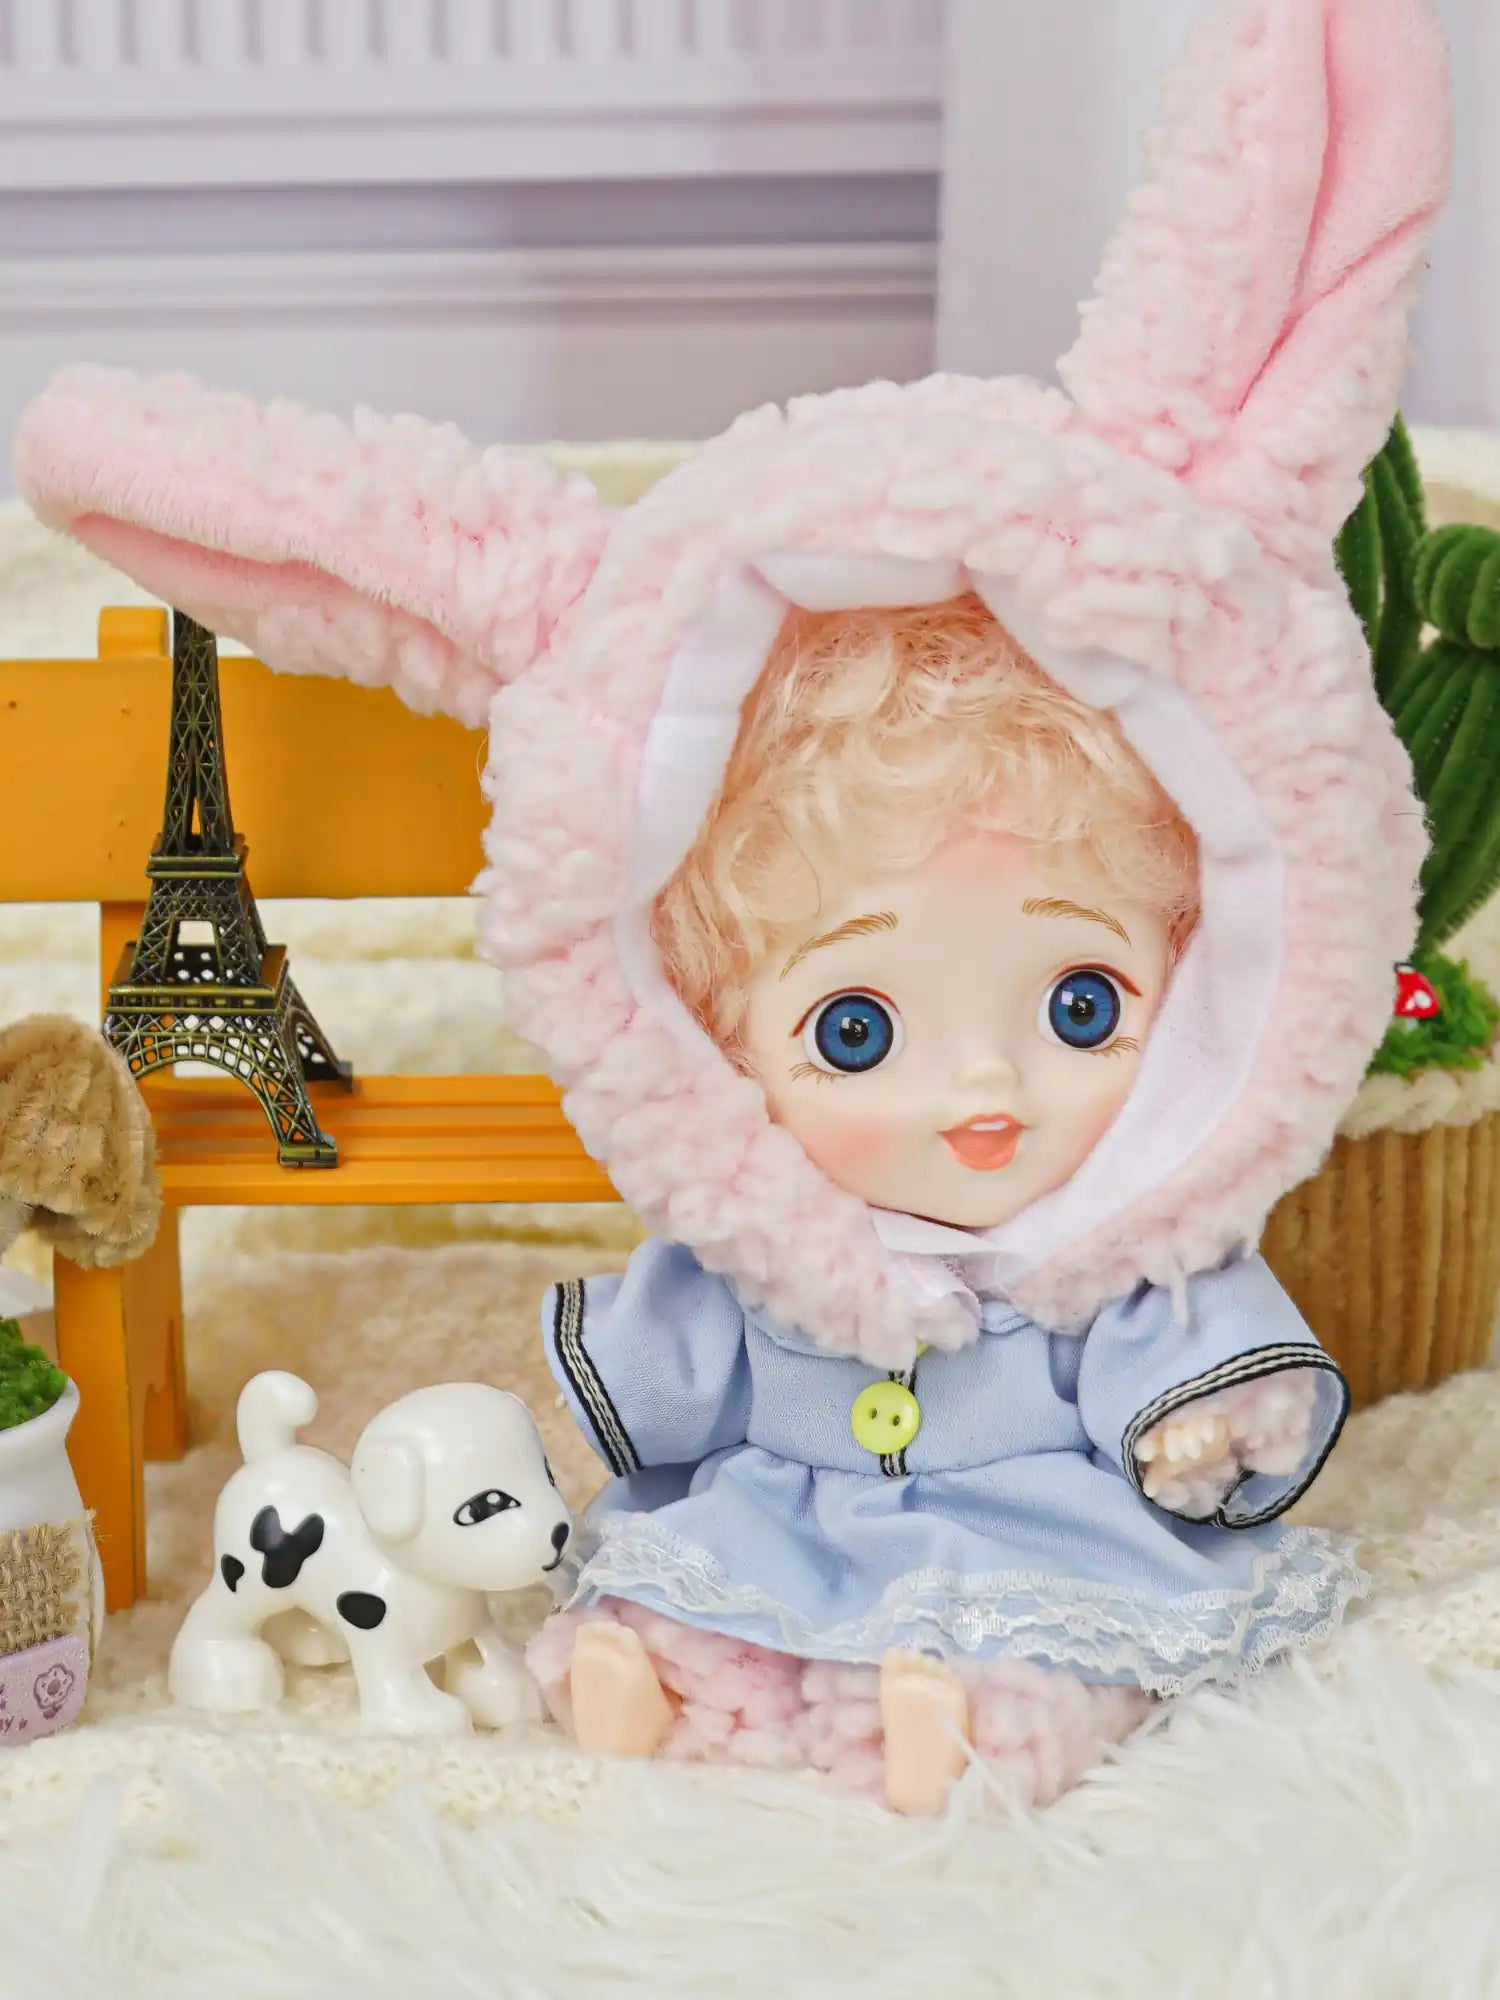 BJD with golden curls in a bunny outfit, next to a miniature Parisian landmark.